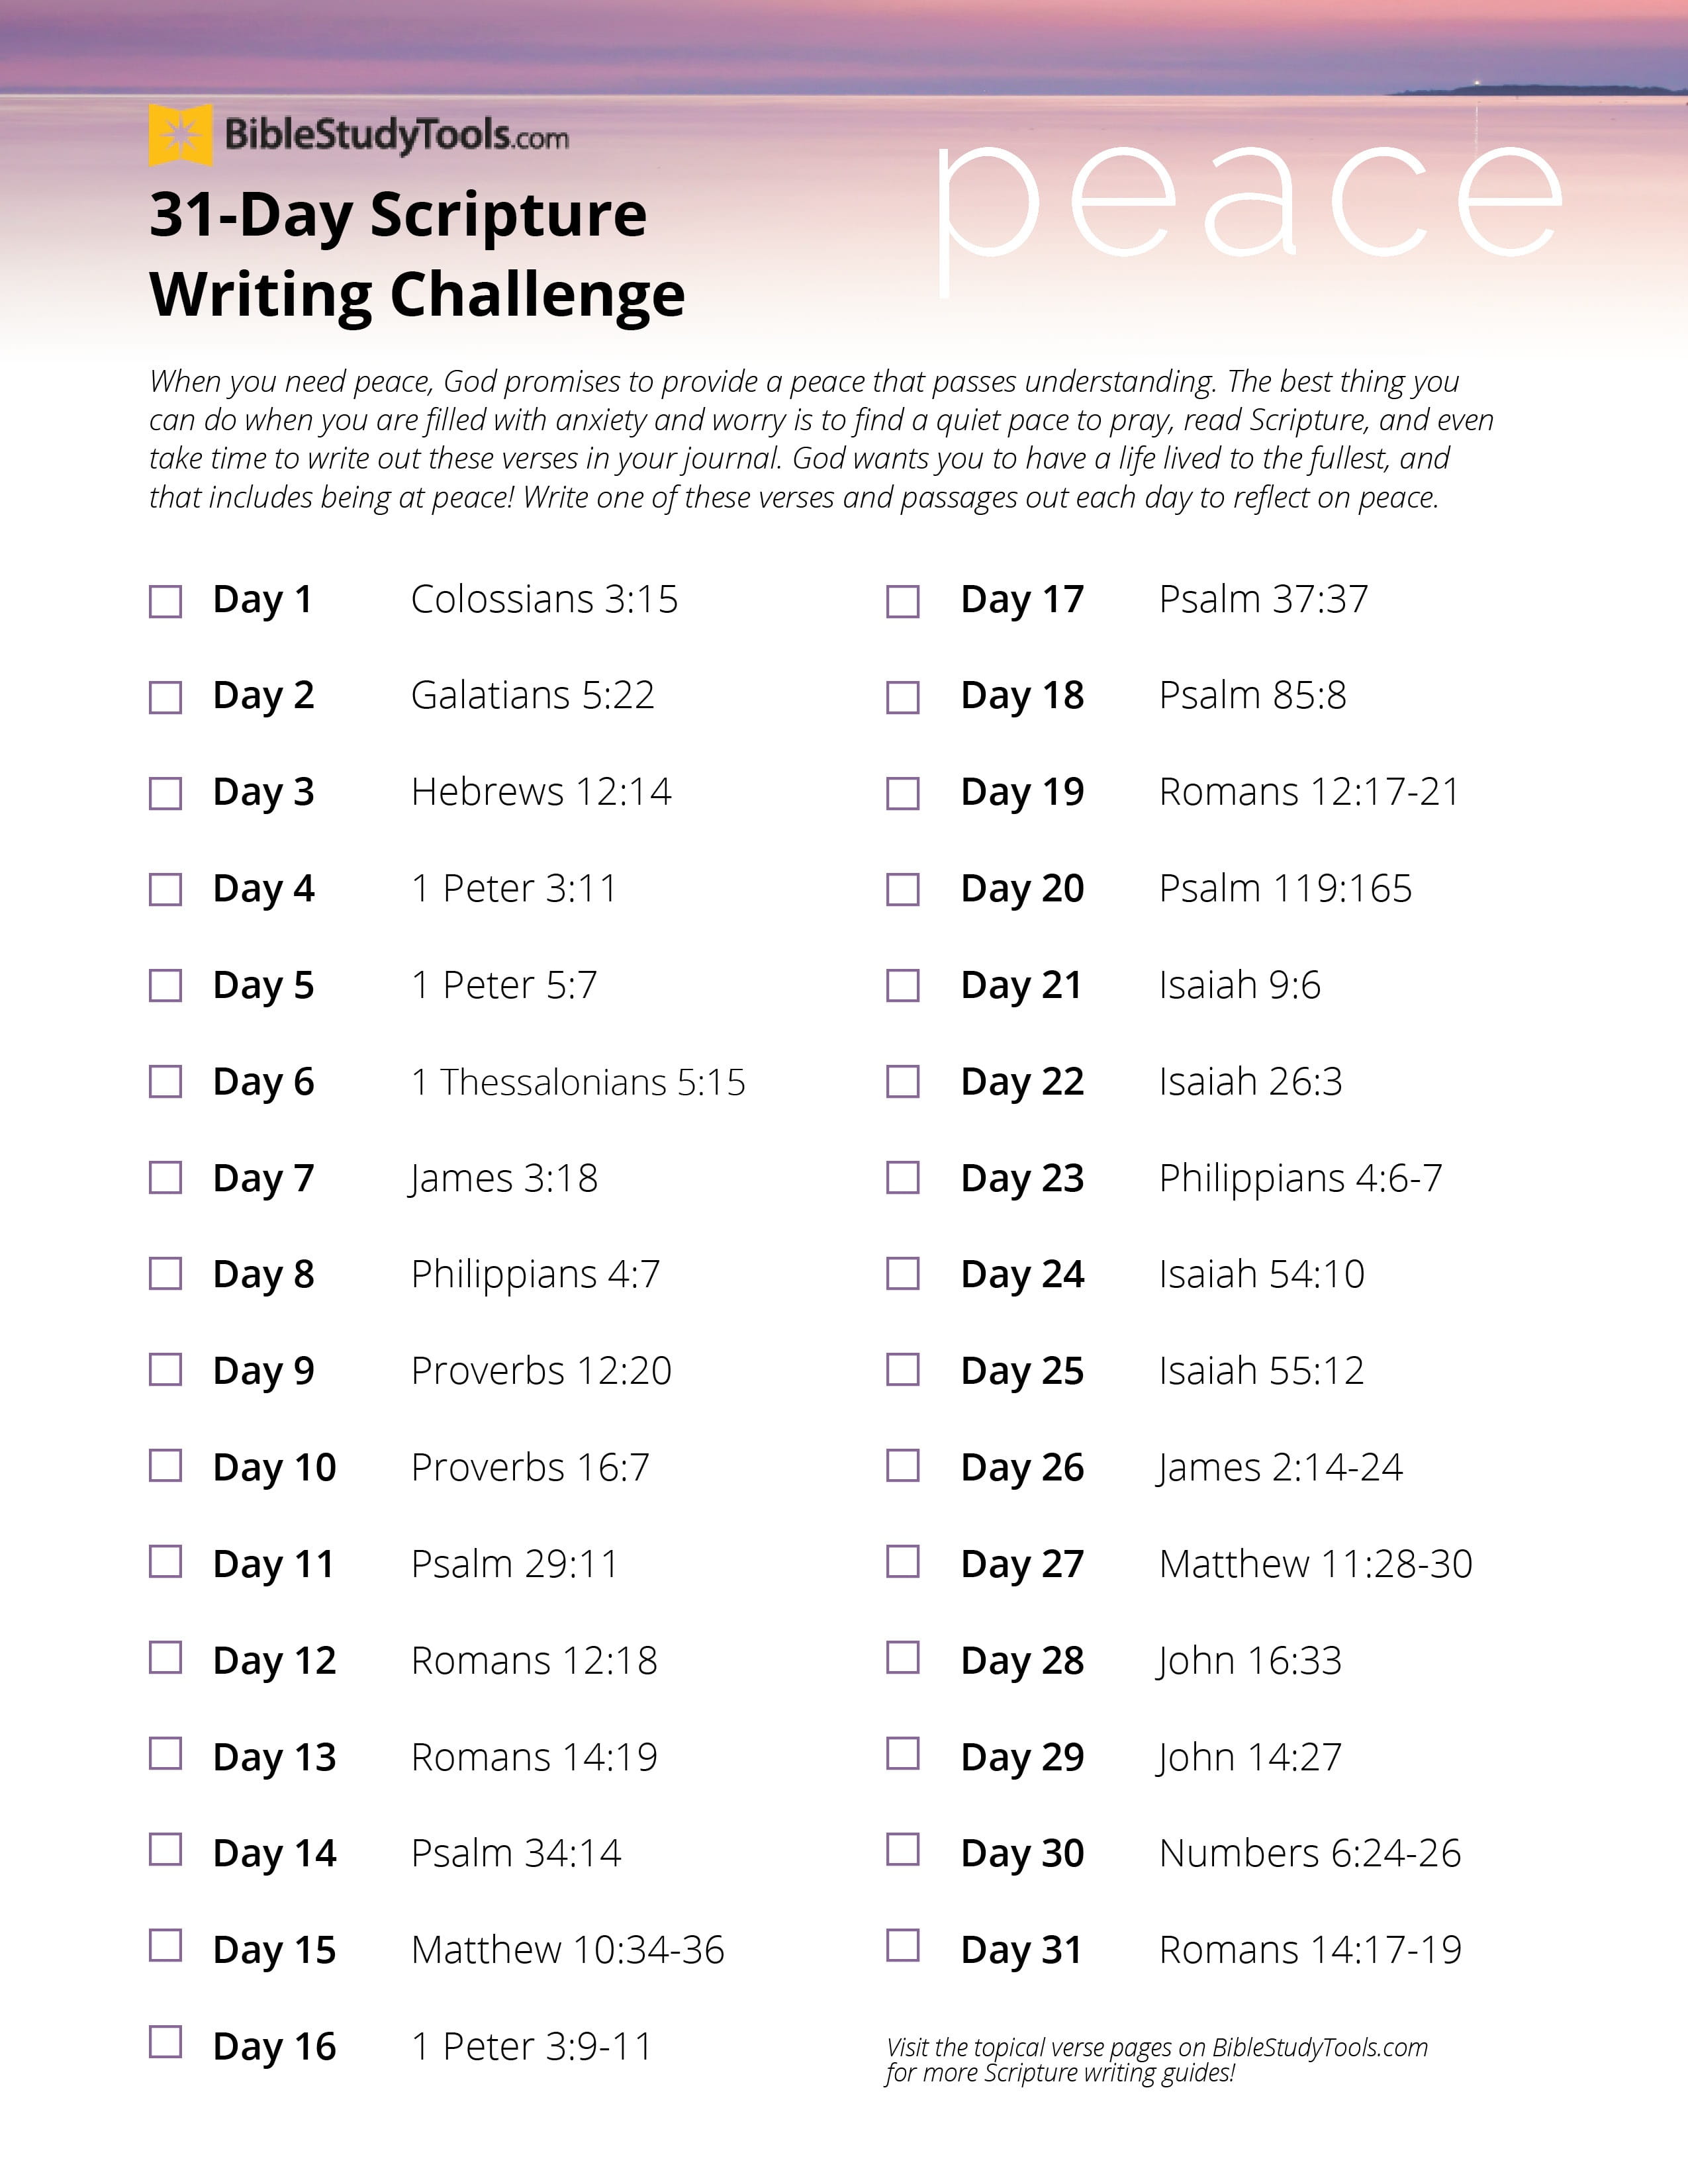 30 day scripture writing challenge - riloprojects